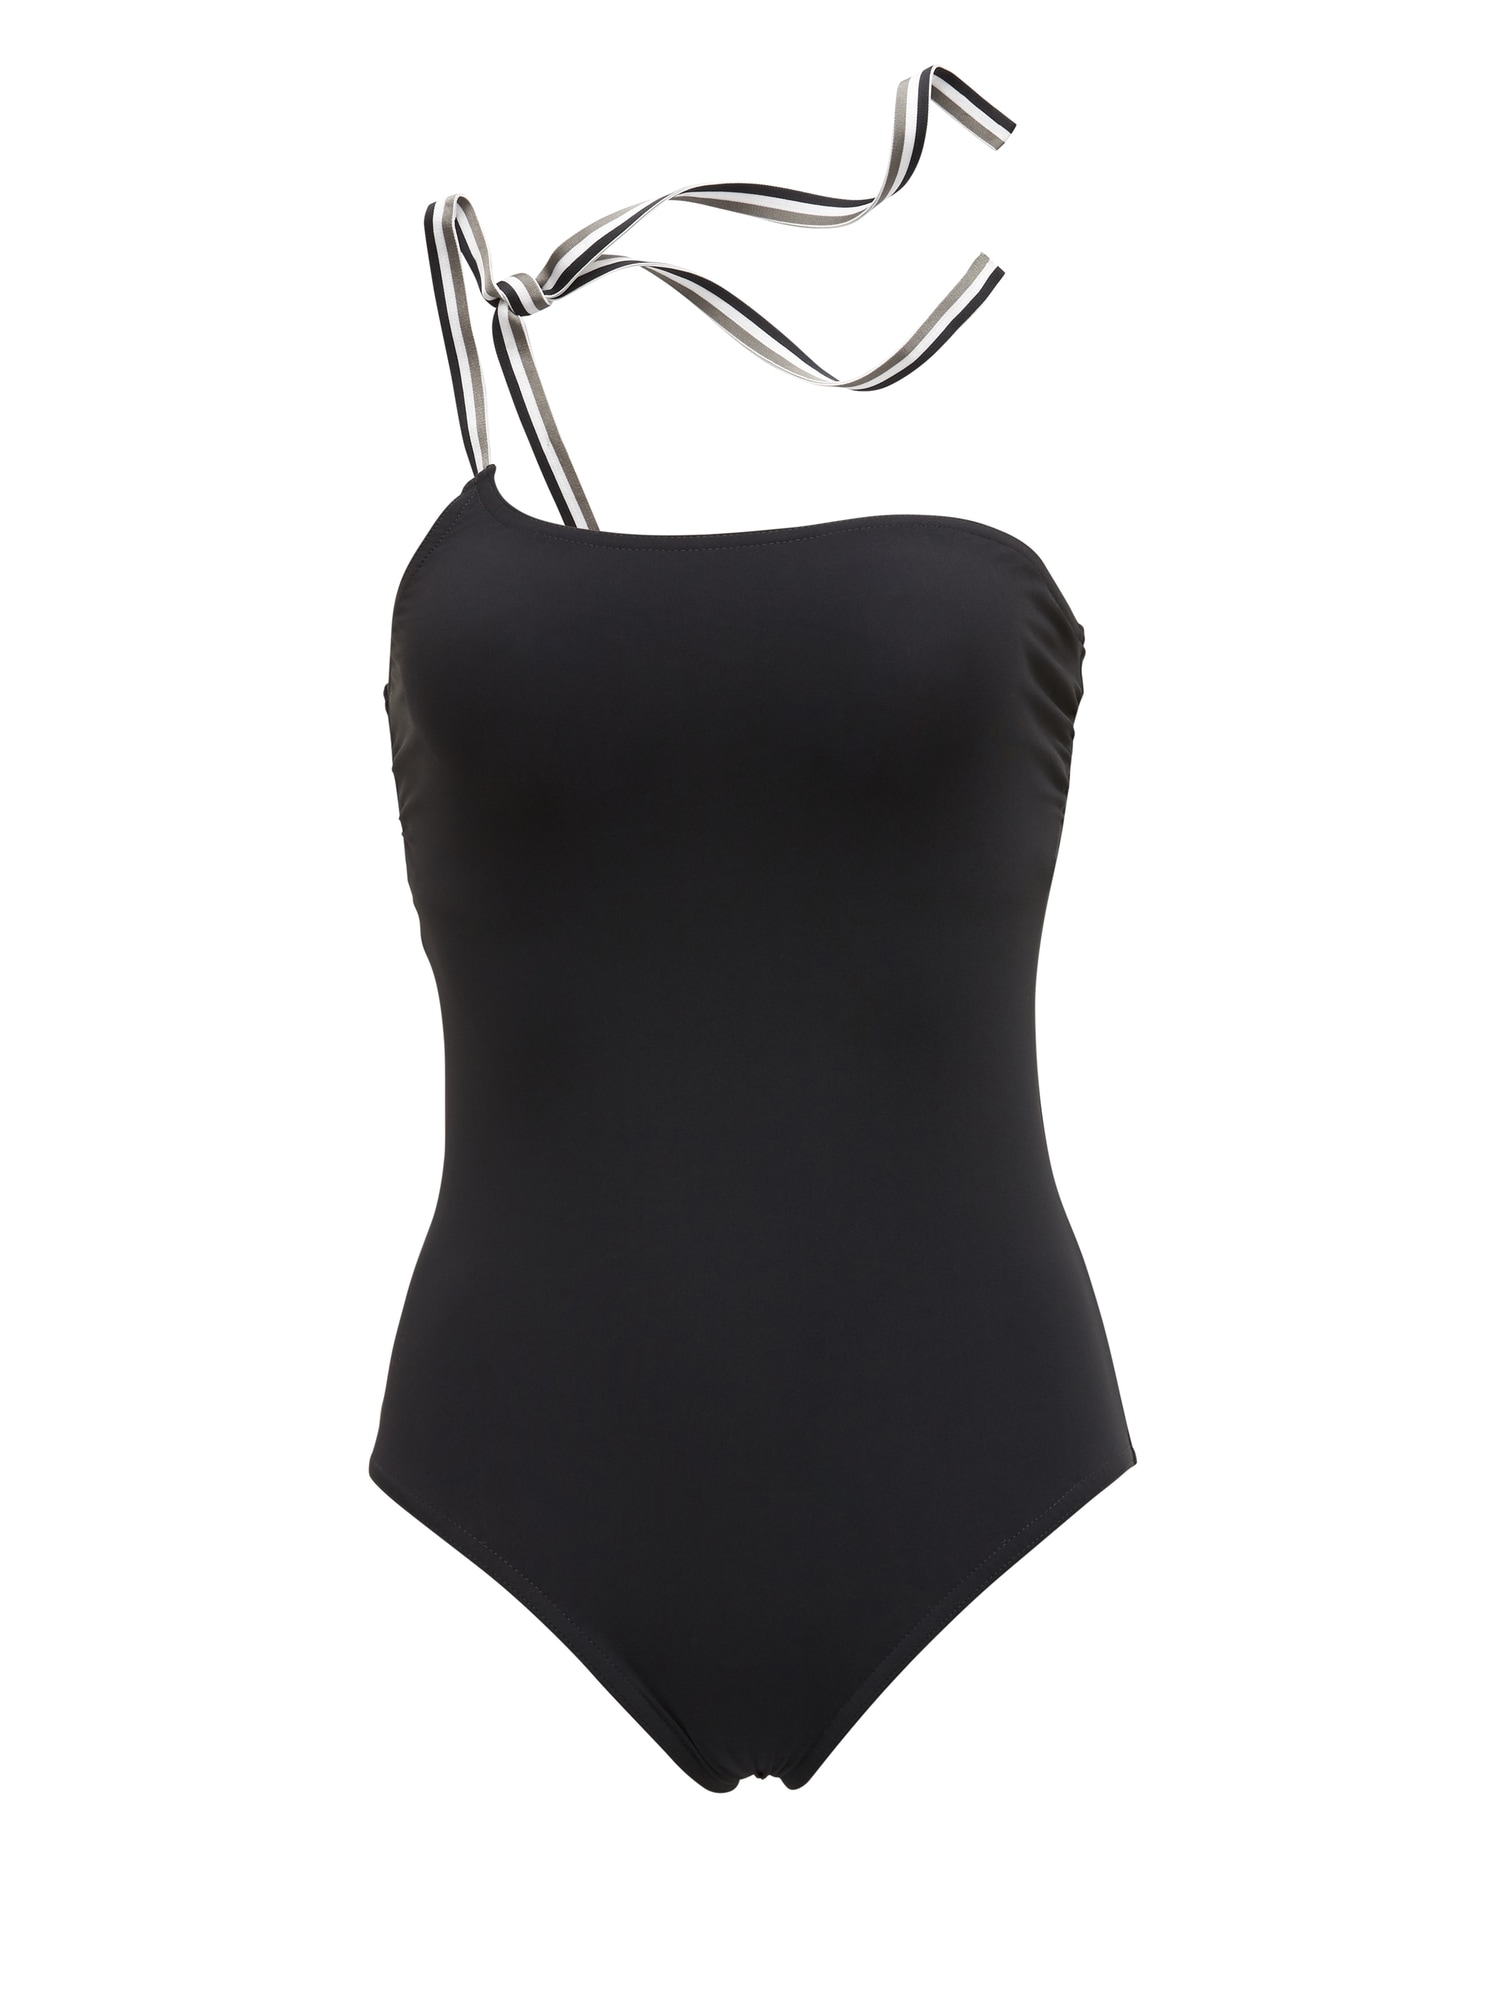 Karla Colletto &#124 Mayfair One-Shoulder One Piece